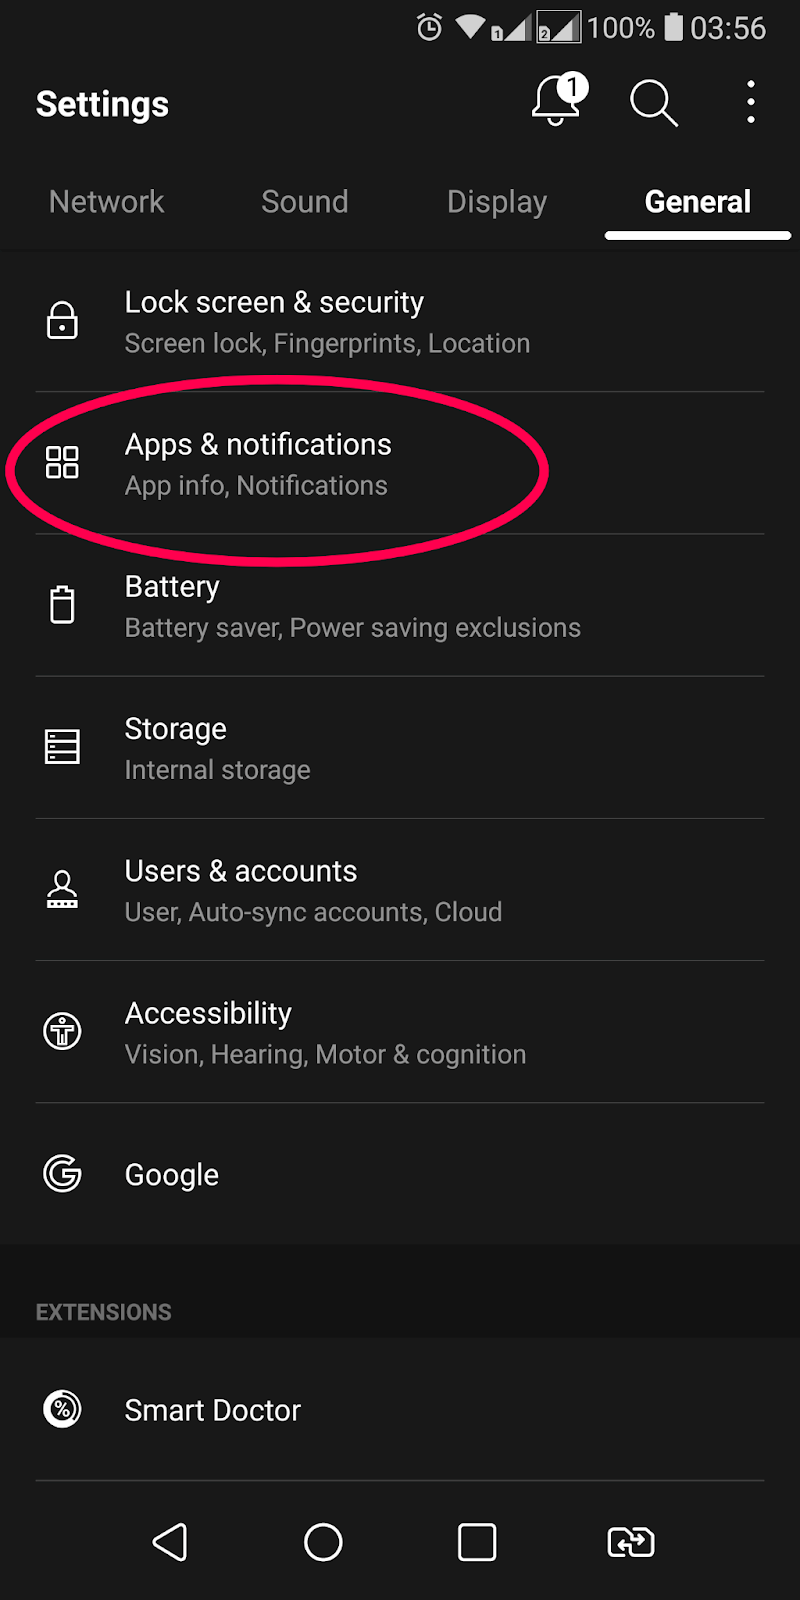 Open phone settings and select Apps.